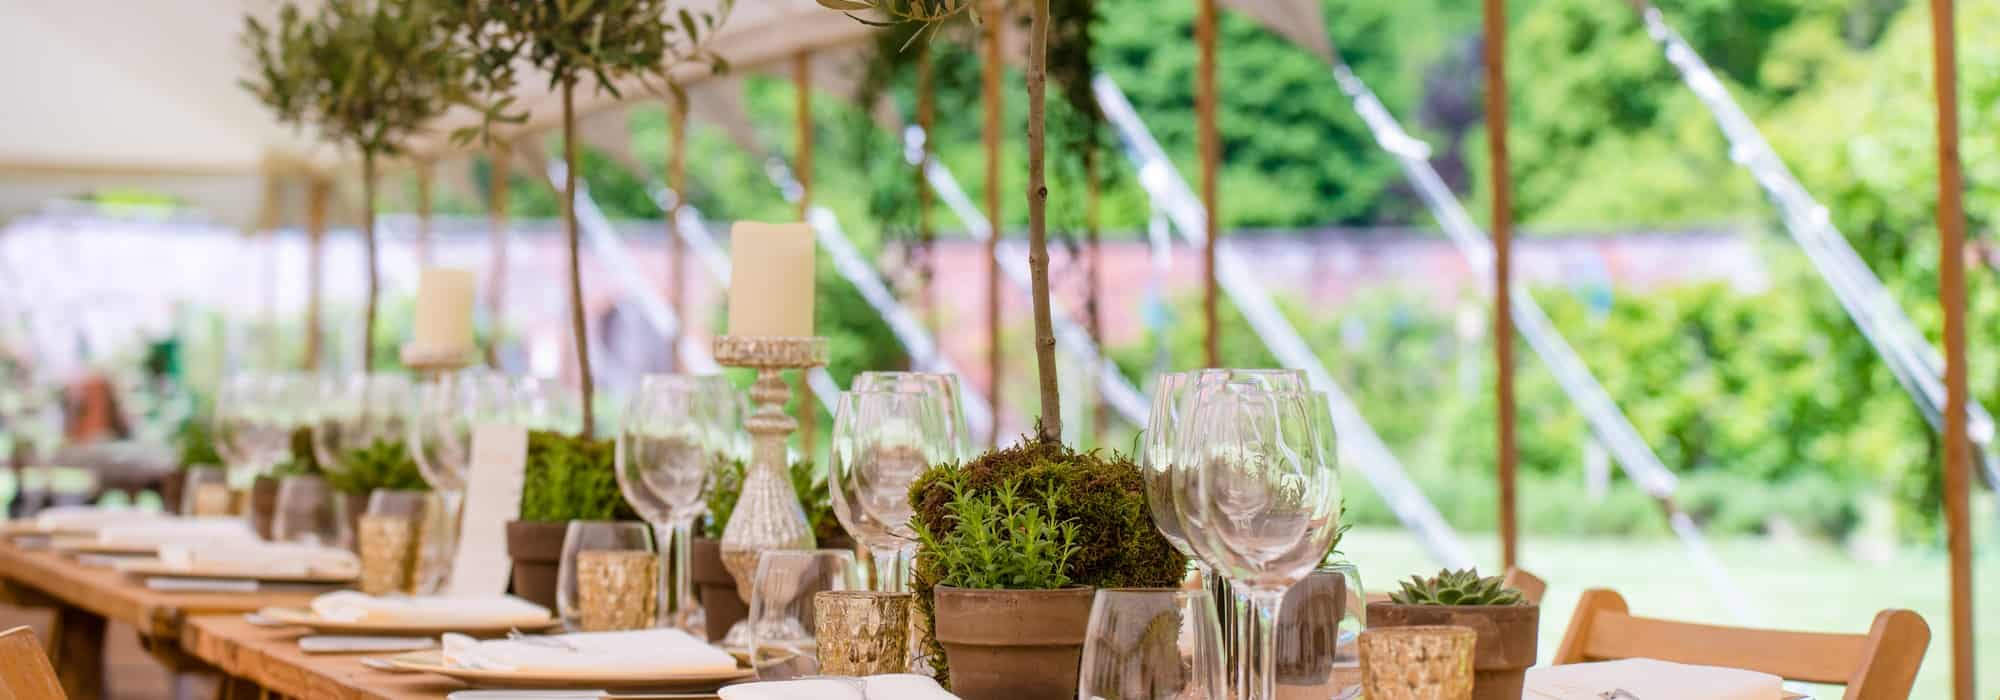 Hire Your Day Wedding venue styling - marquee